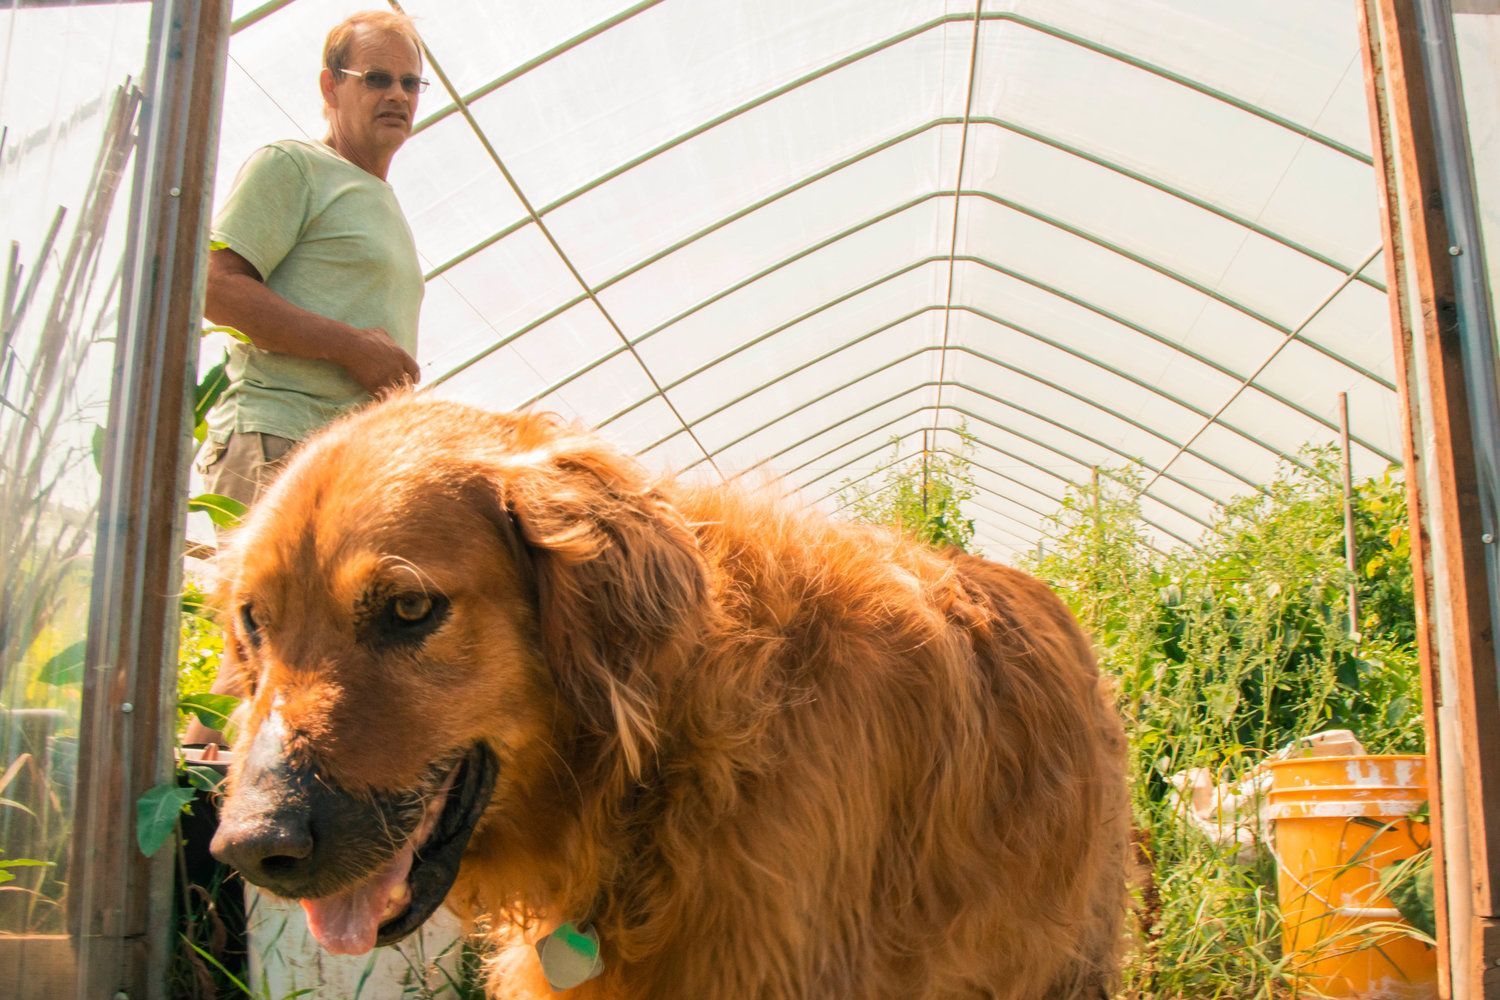 Burke Deming talks about the plants inside a greenhouse he built as his dog Cooper walks by Tuesday morning at Olequa Farm in Winlock.